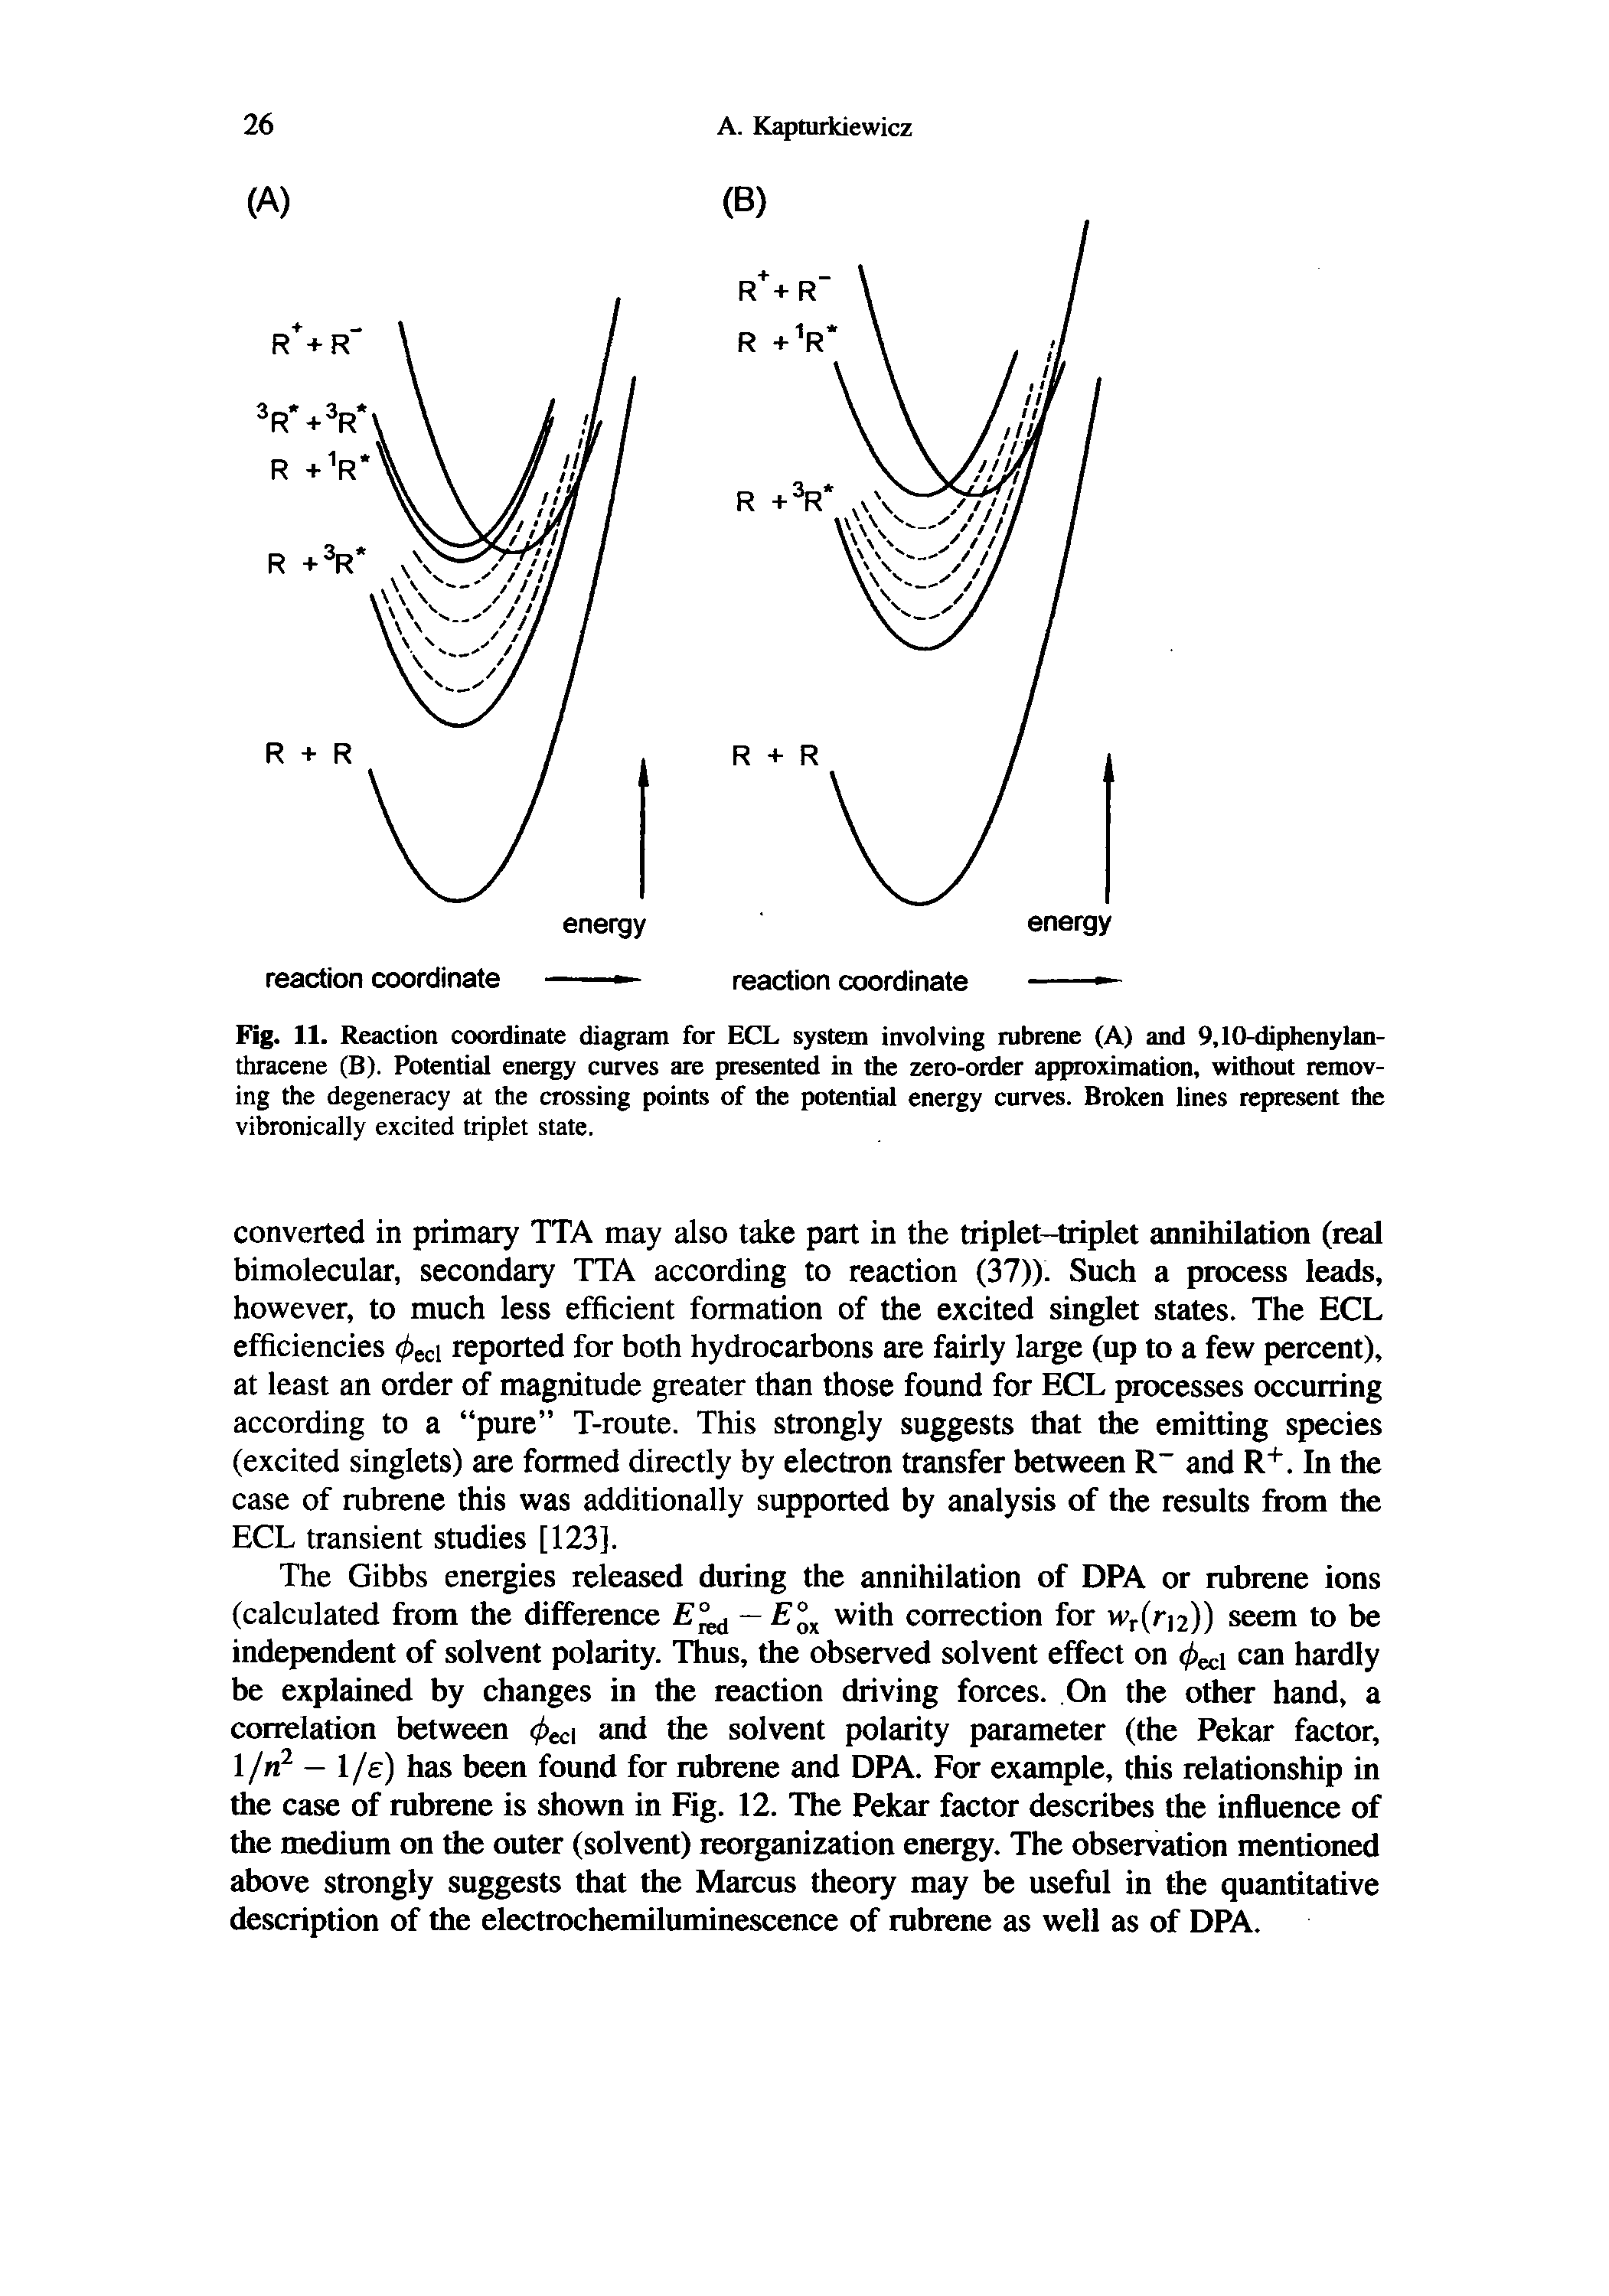 Fig. 11. Reaction coordinate diagram for ECL system involving rubrene (A) and 9,10-diphenylan-thracene (B). Potential energy curves are presented in the zero-order approximation, without removing the degeneracy at the crossing points of the potential energy curves. Broken lines represent the vibronically excited triplet state.